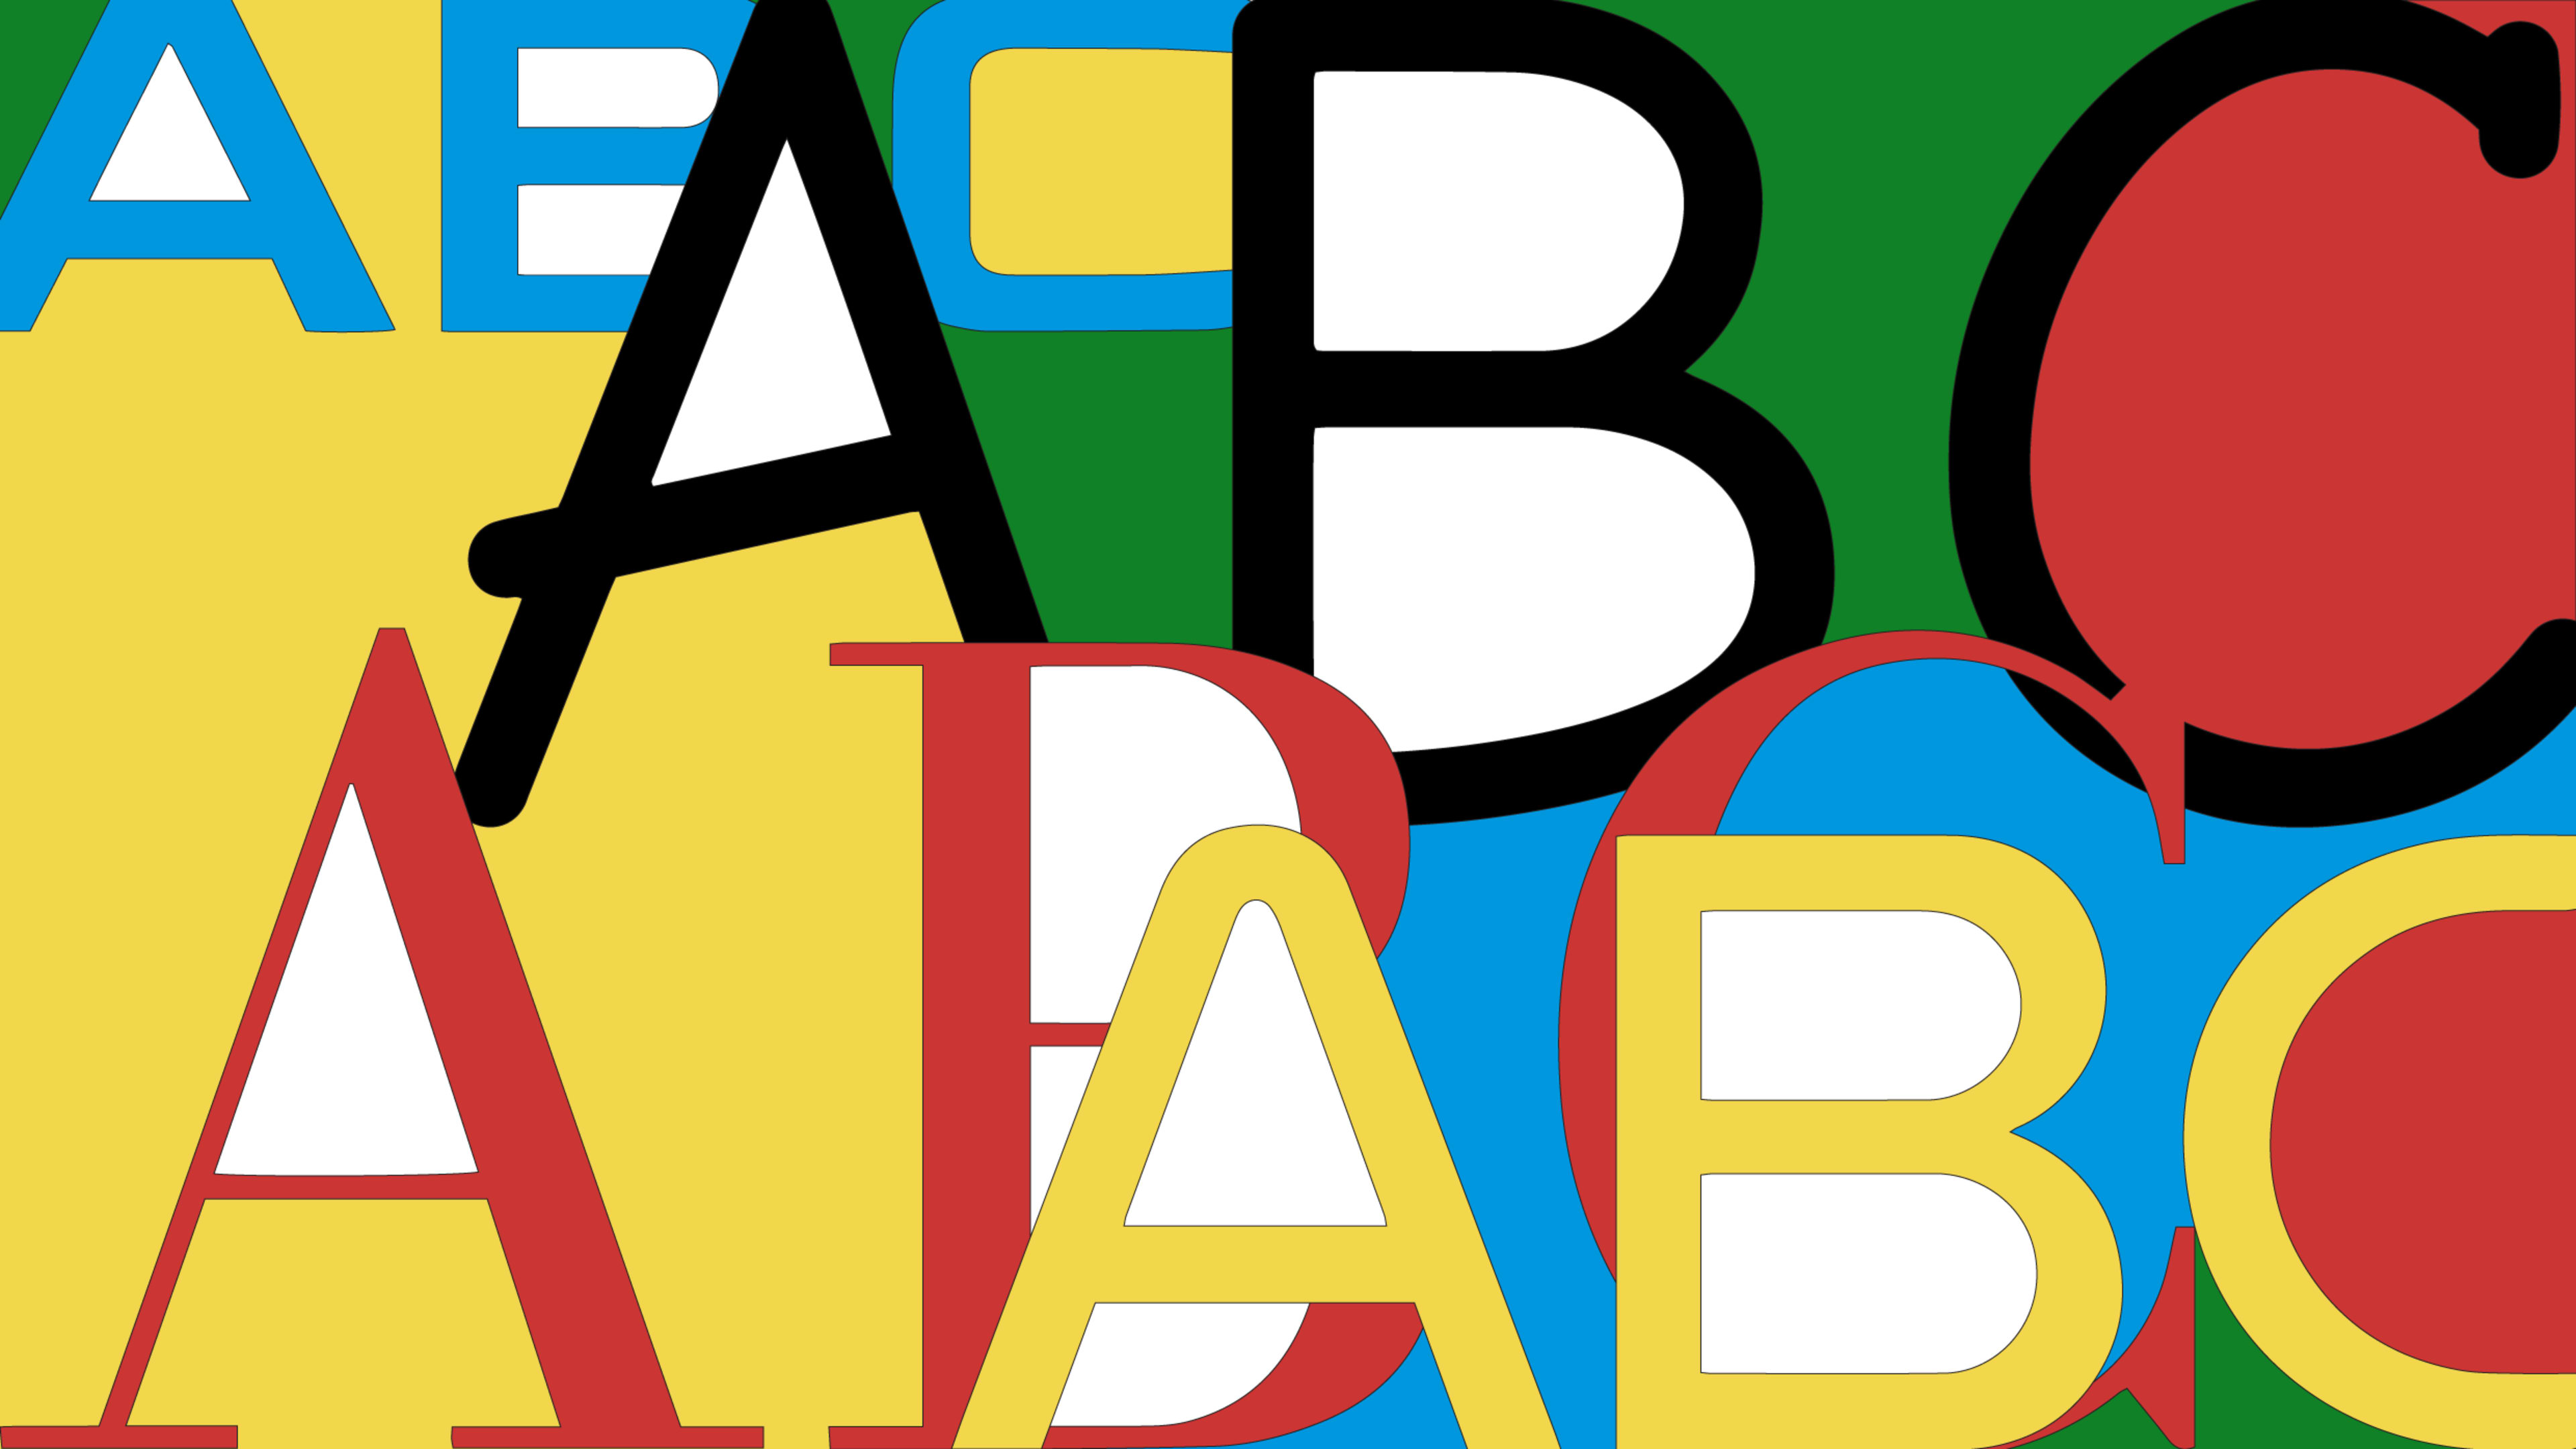 The 5 best new fonts to use in Google Docs